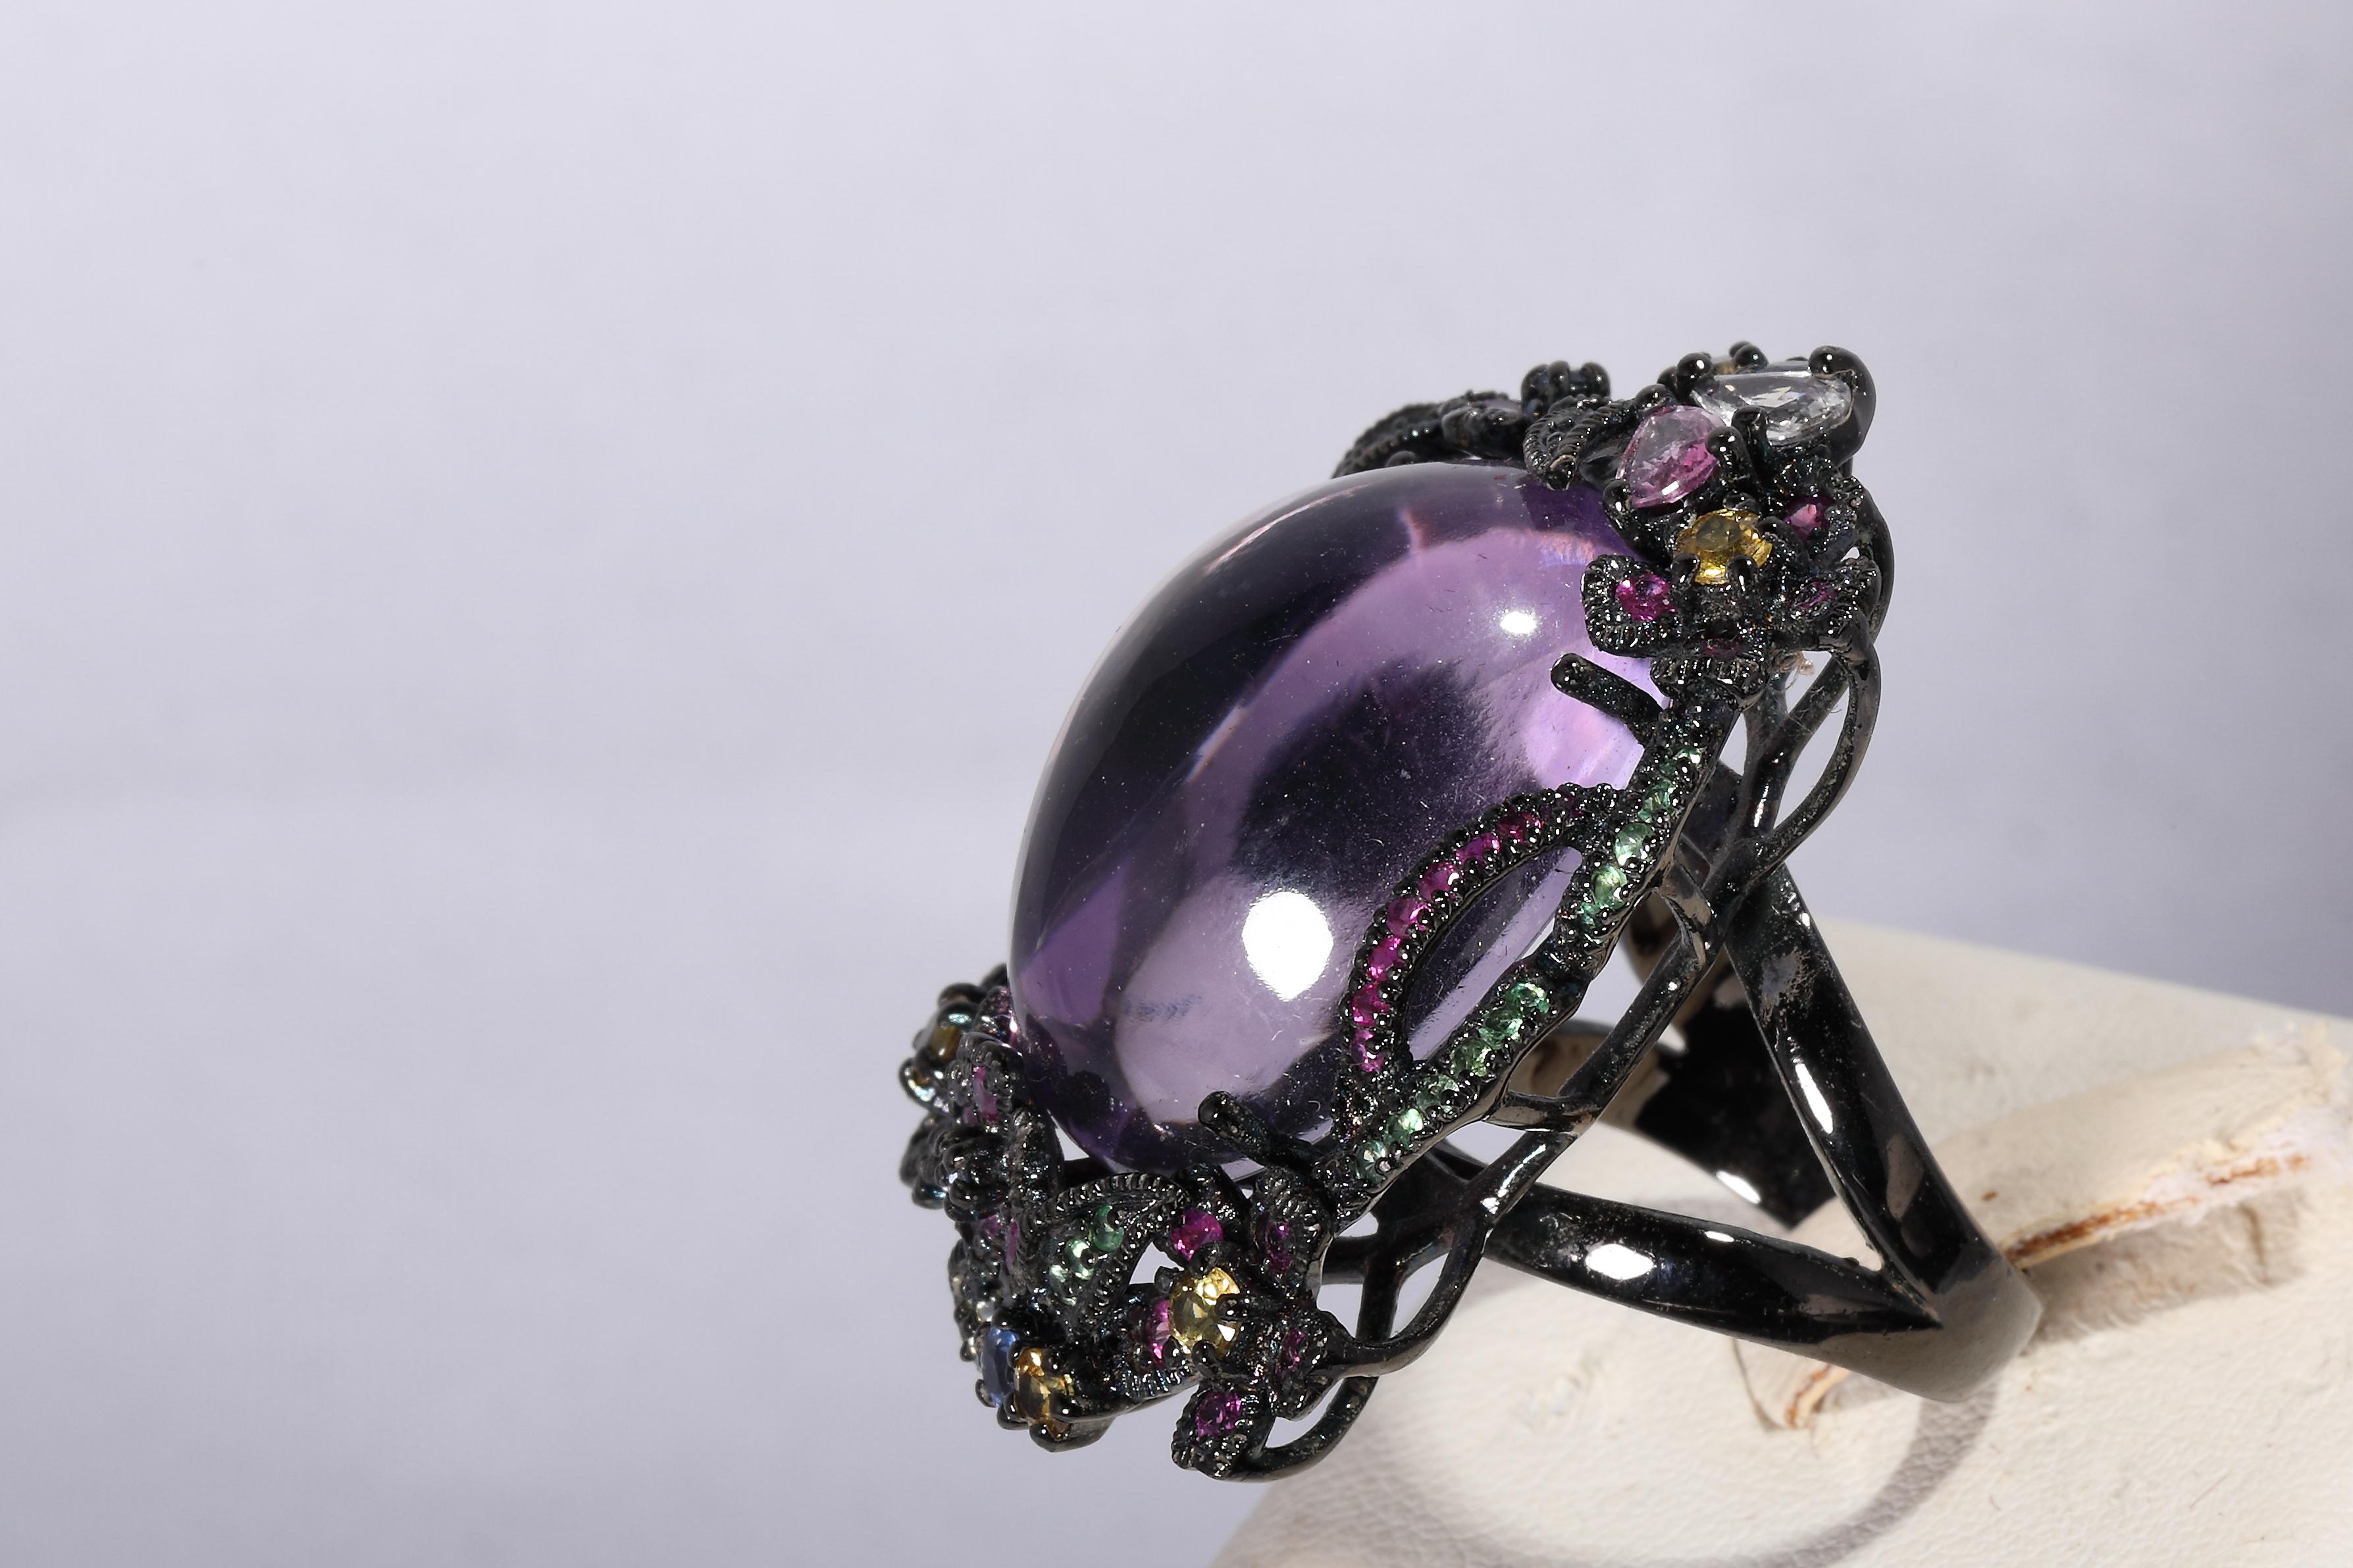 Blackened silver
hallmarked with fineness 925
set with a large amethyst cabochon and colorful sapphires
size ca 40 x 25 mm on top
ringsize 55
weight 25 gram
